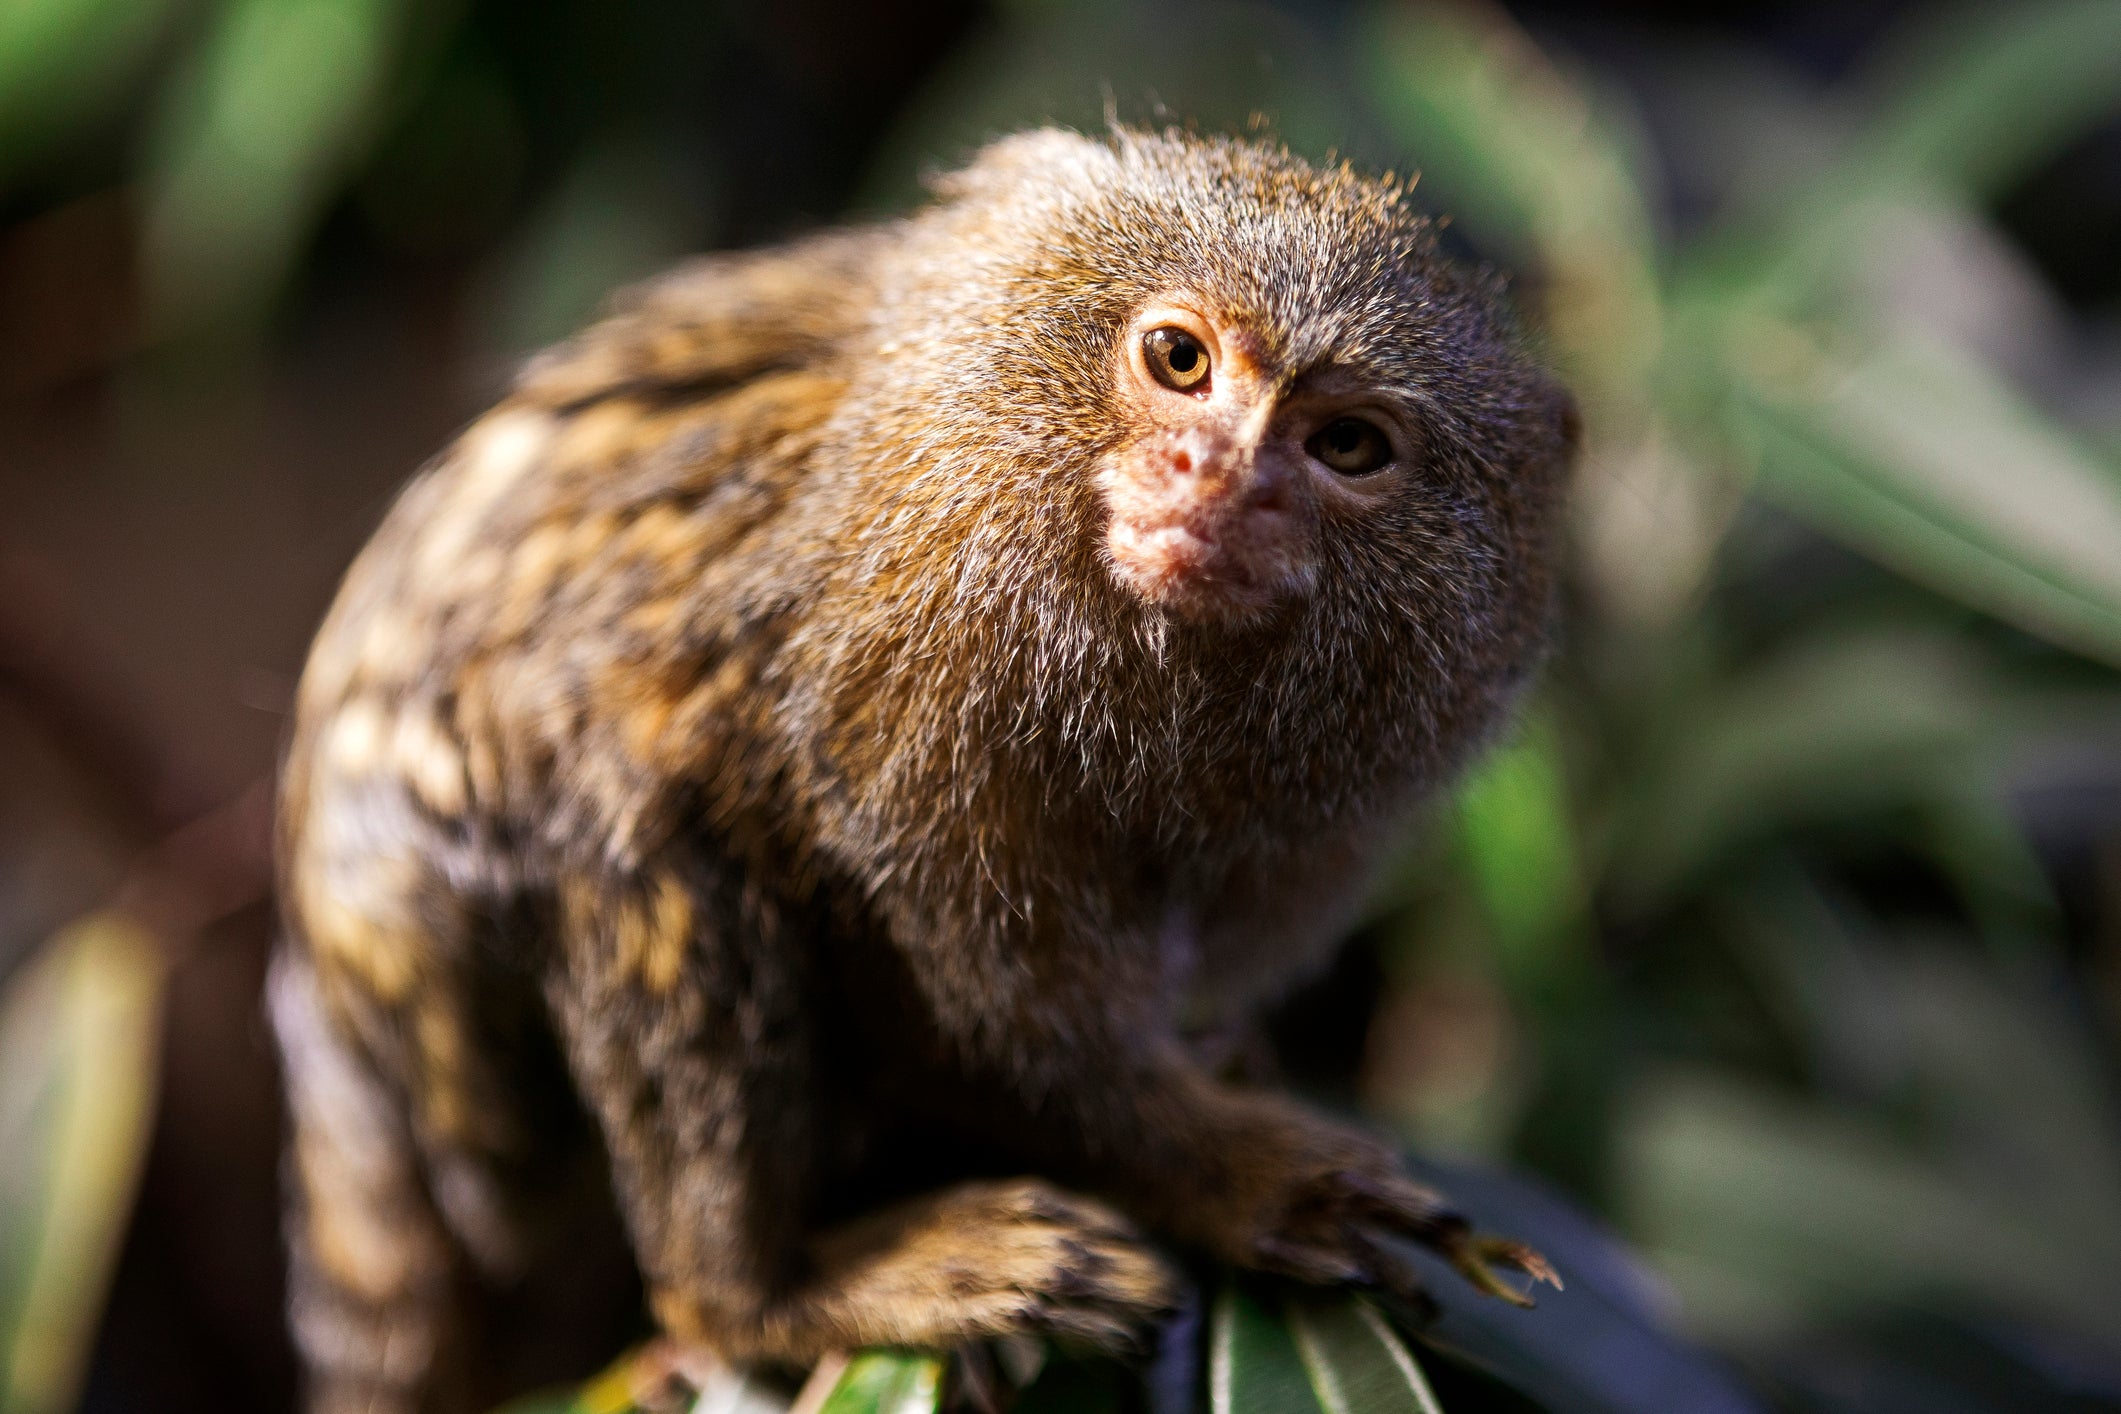 The marmosets with overactive sgACC showed fearful behaviour and higher blood pressure for much longer